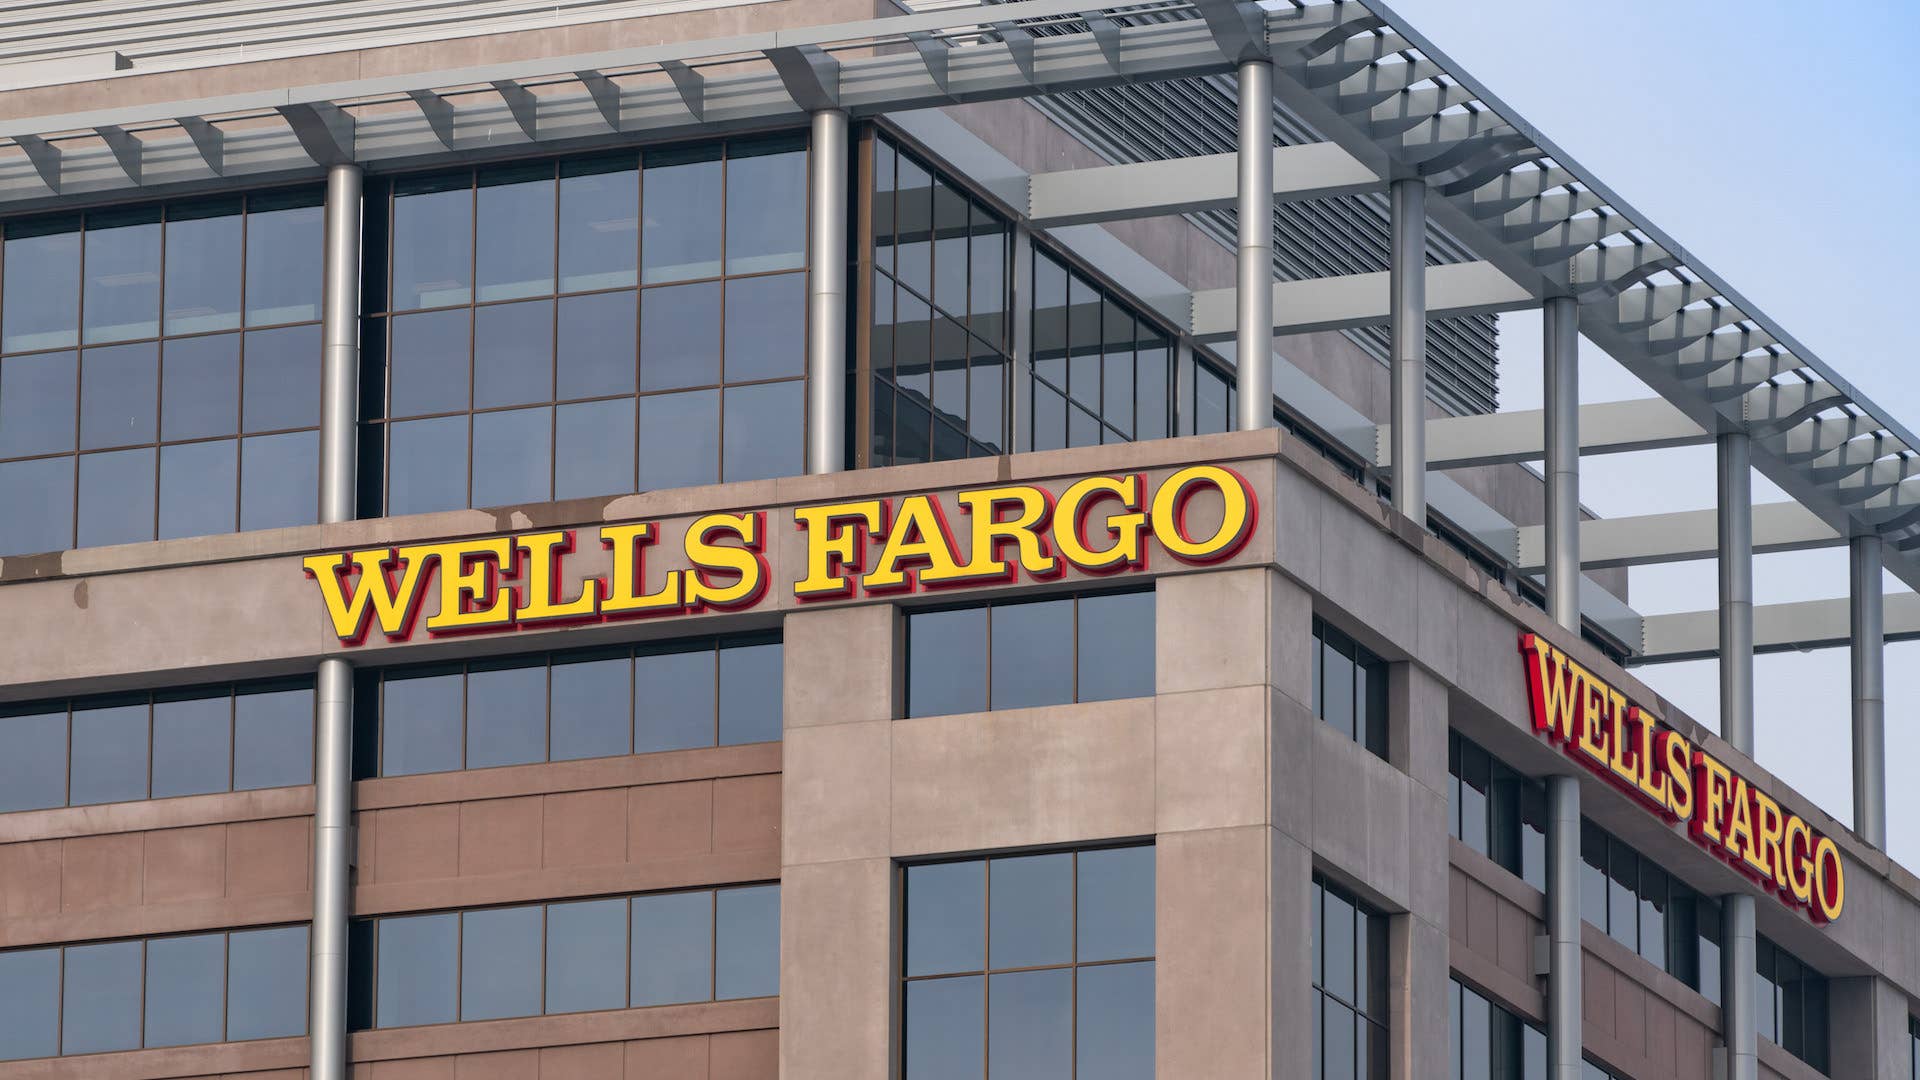 General views of the Wells Fargo tower